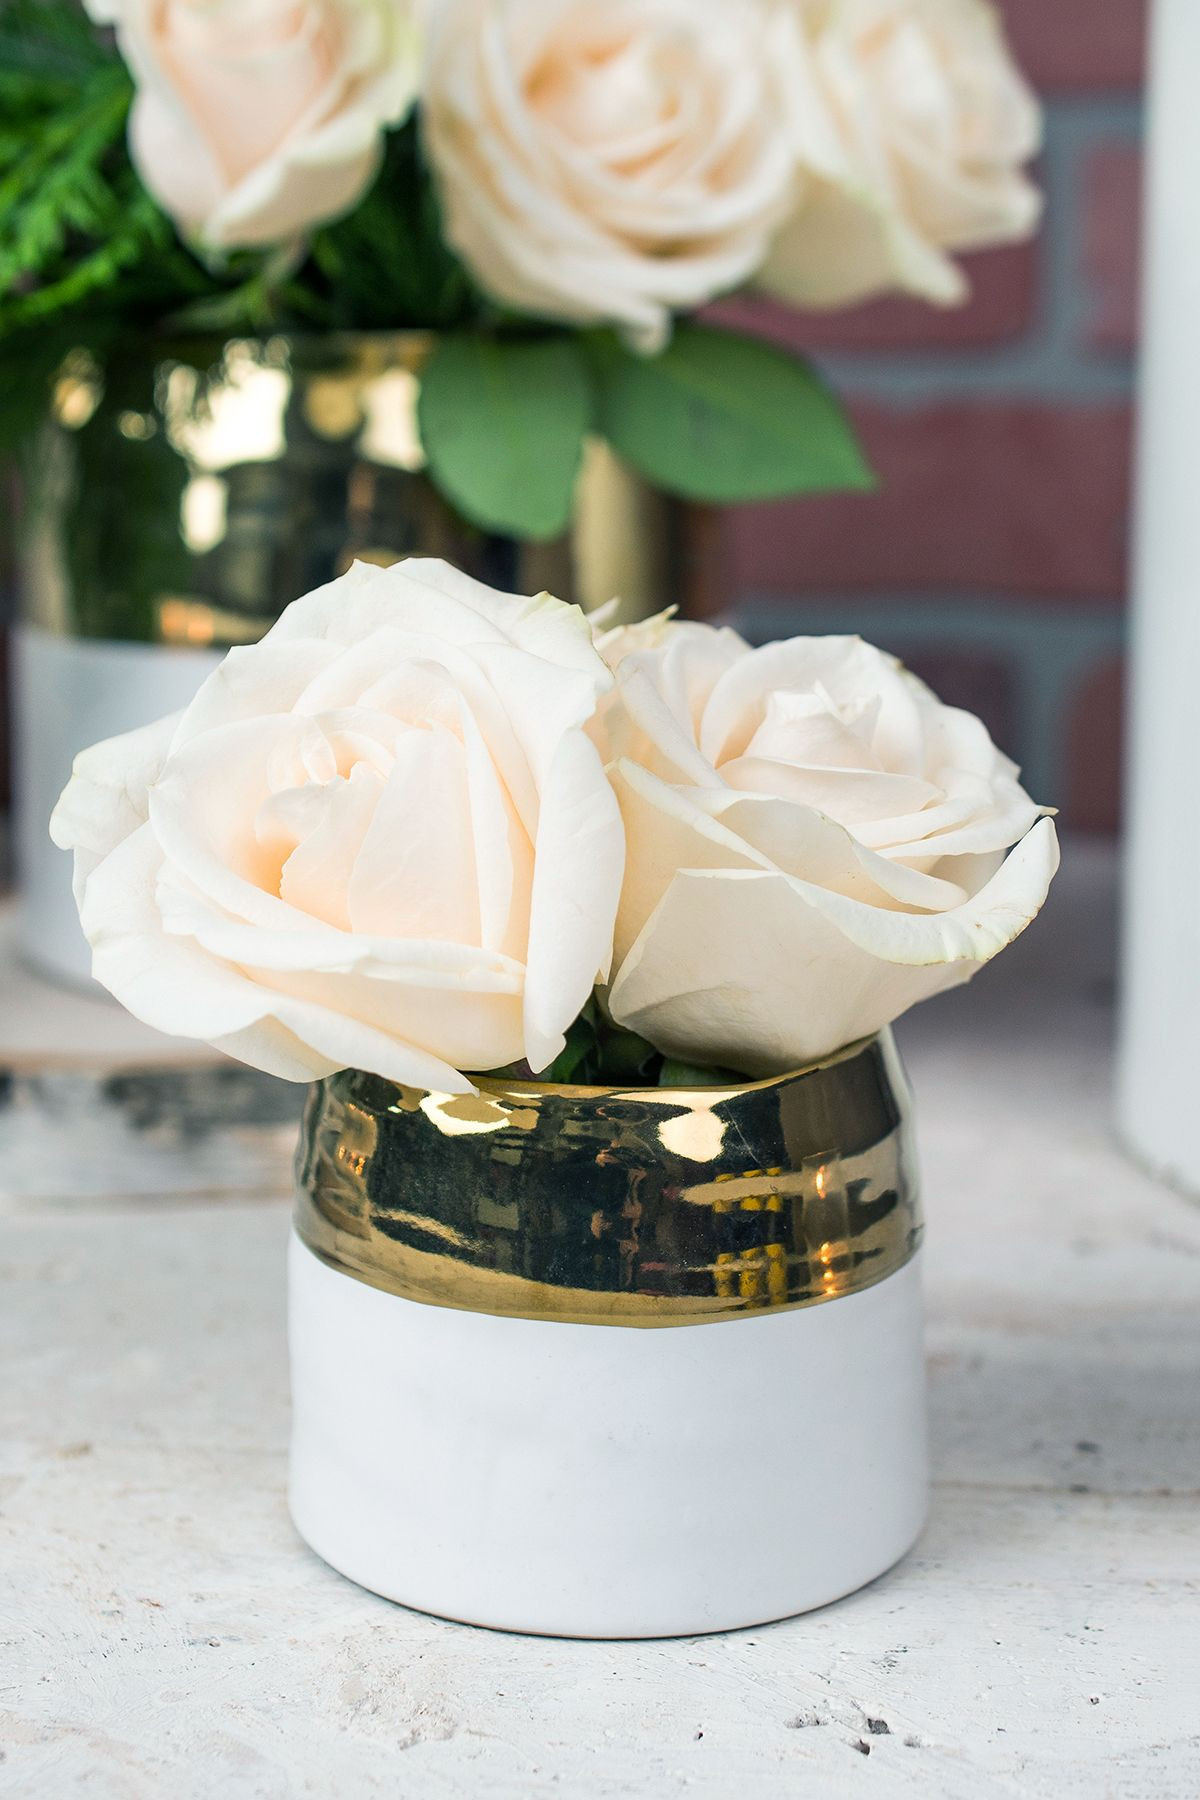 26 Ideal White and Gold Ceramic Vase 2024 free download white and gold ceramic vase of white gold ceramic claire votive holder and vase centerpiece within white gold ceramic claire votive holder and vase